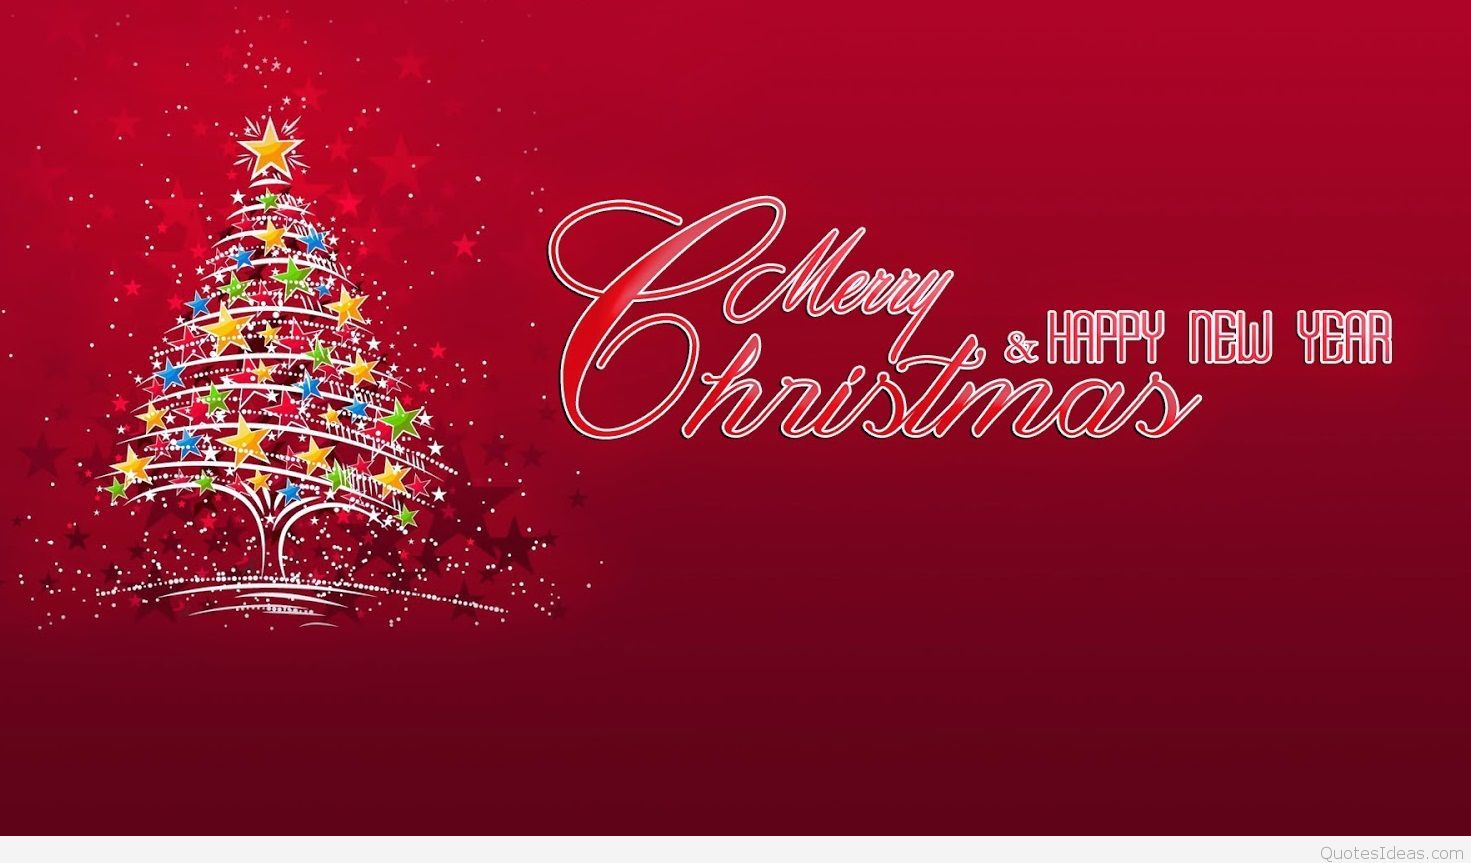 Best merry Christmas & Happy new year wallpaper 2016